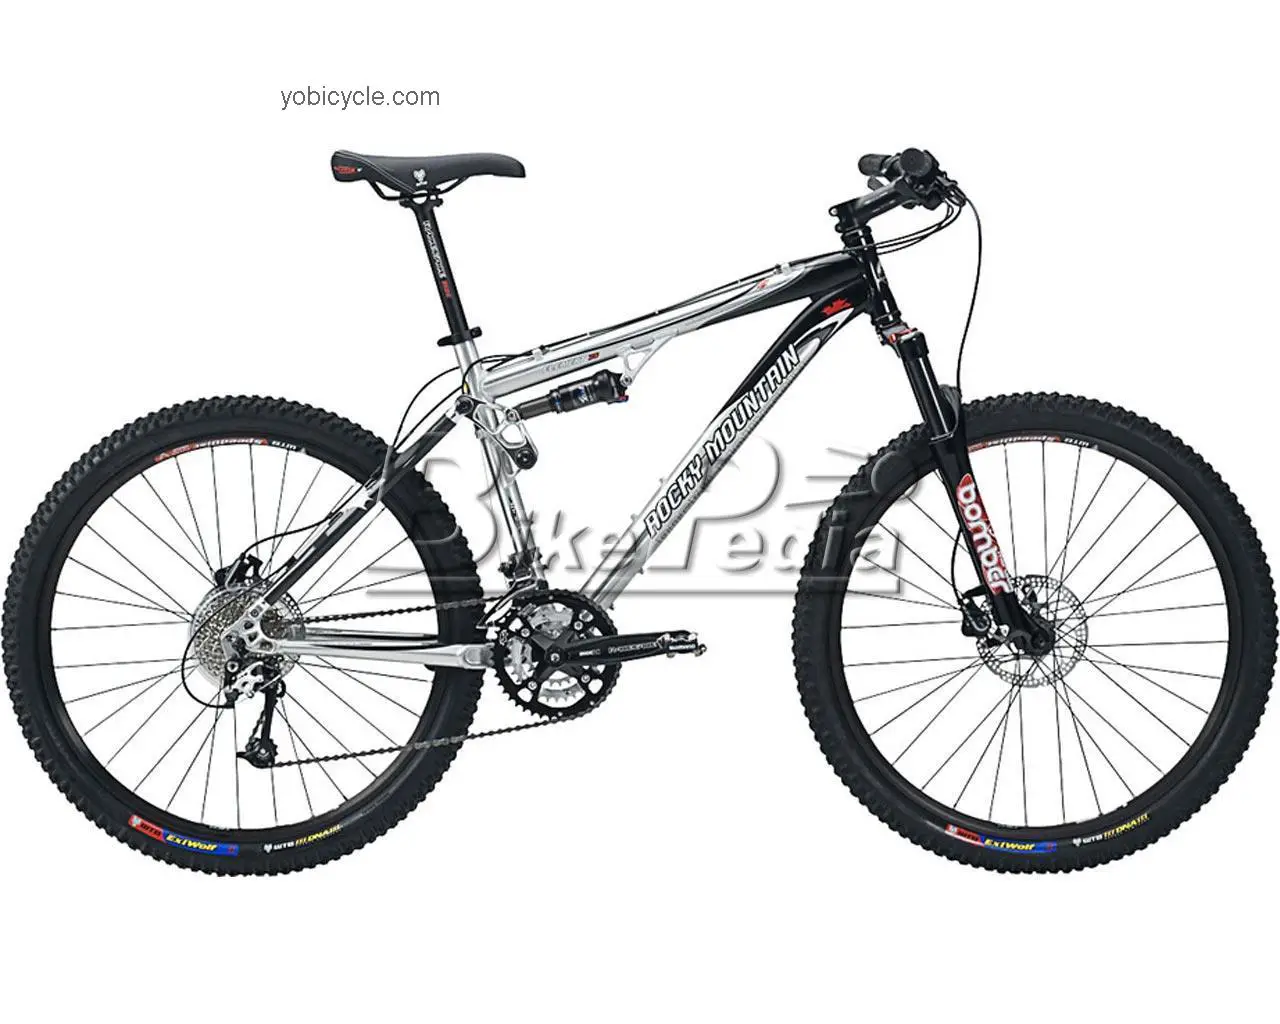 Rocky Mountain Element 30 2009 comparison online with competitors